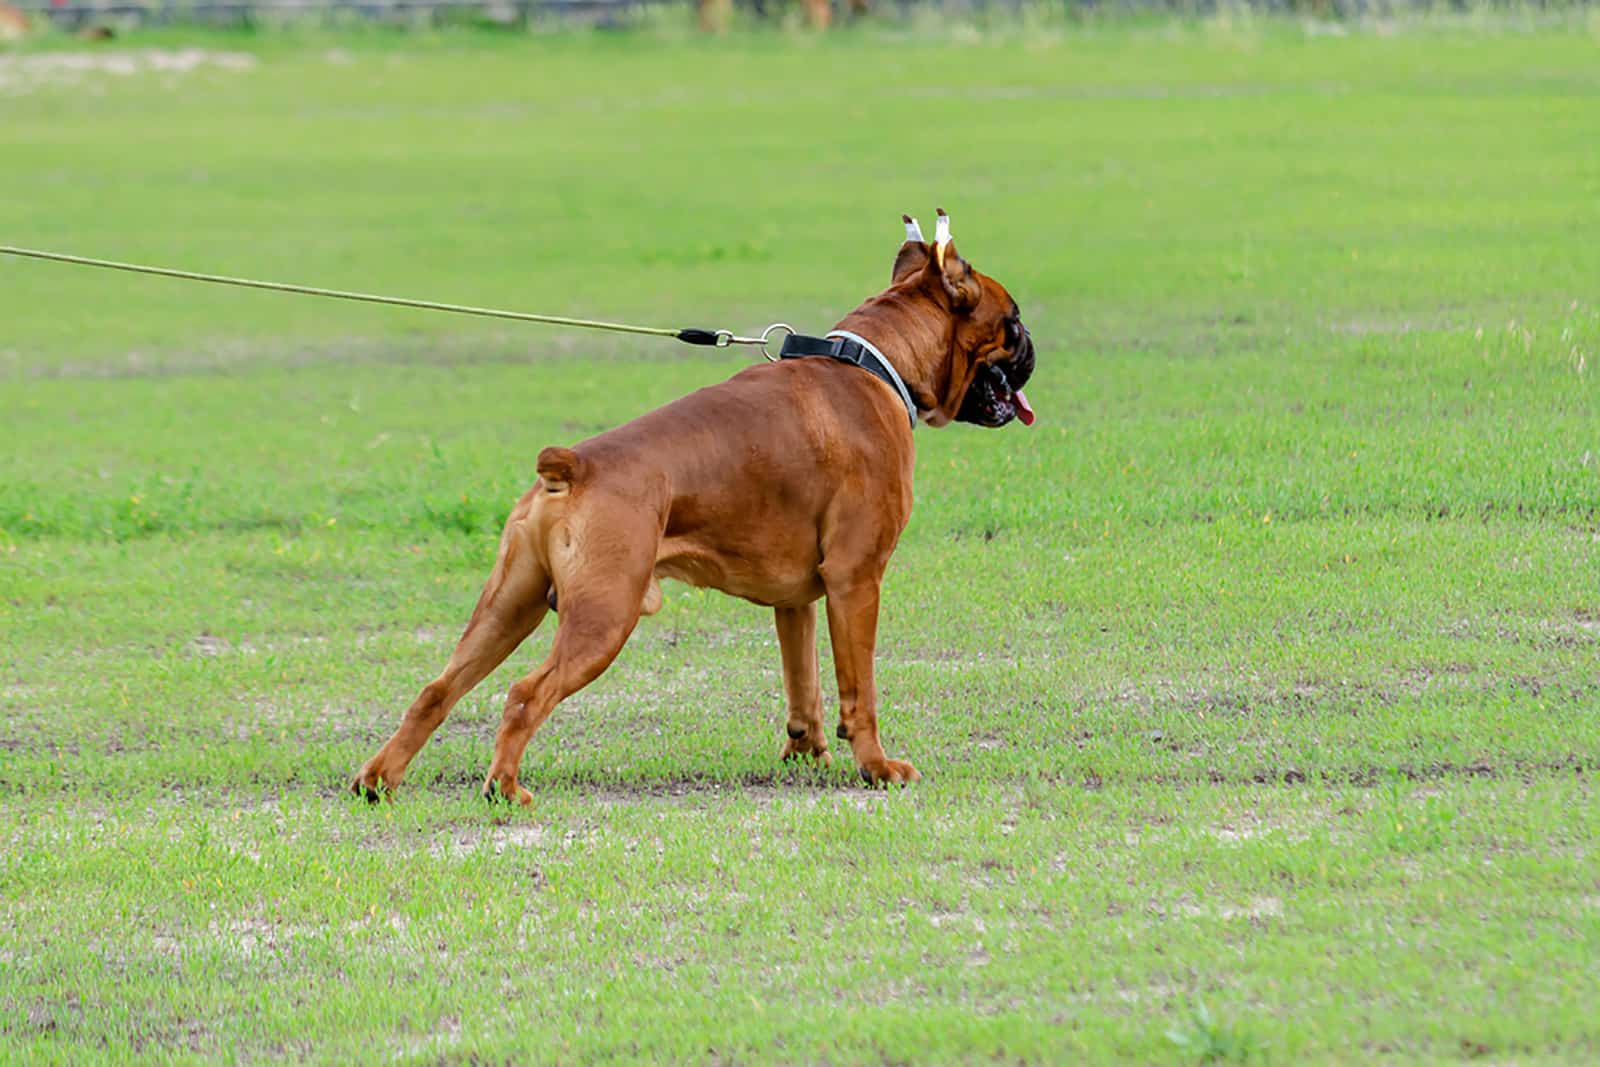 boxer dog with cropped ears and docked tail standing on the grass